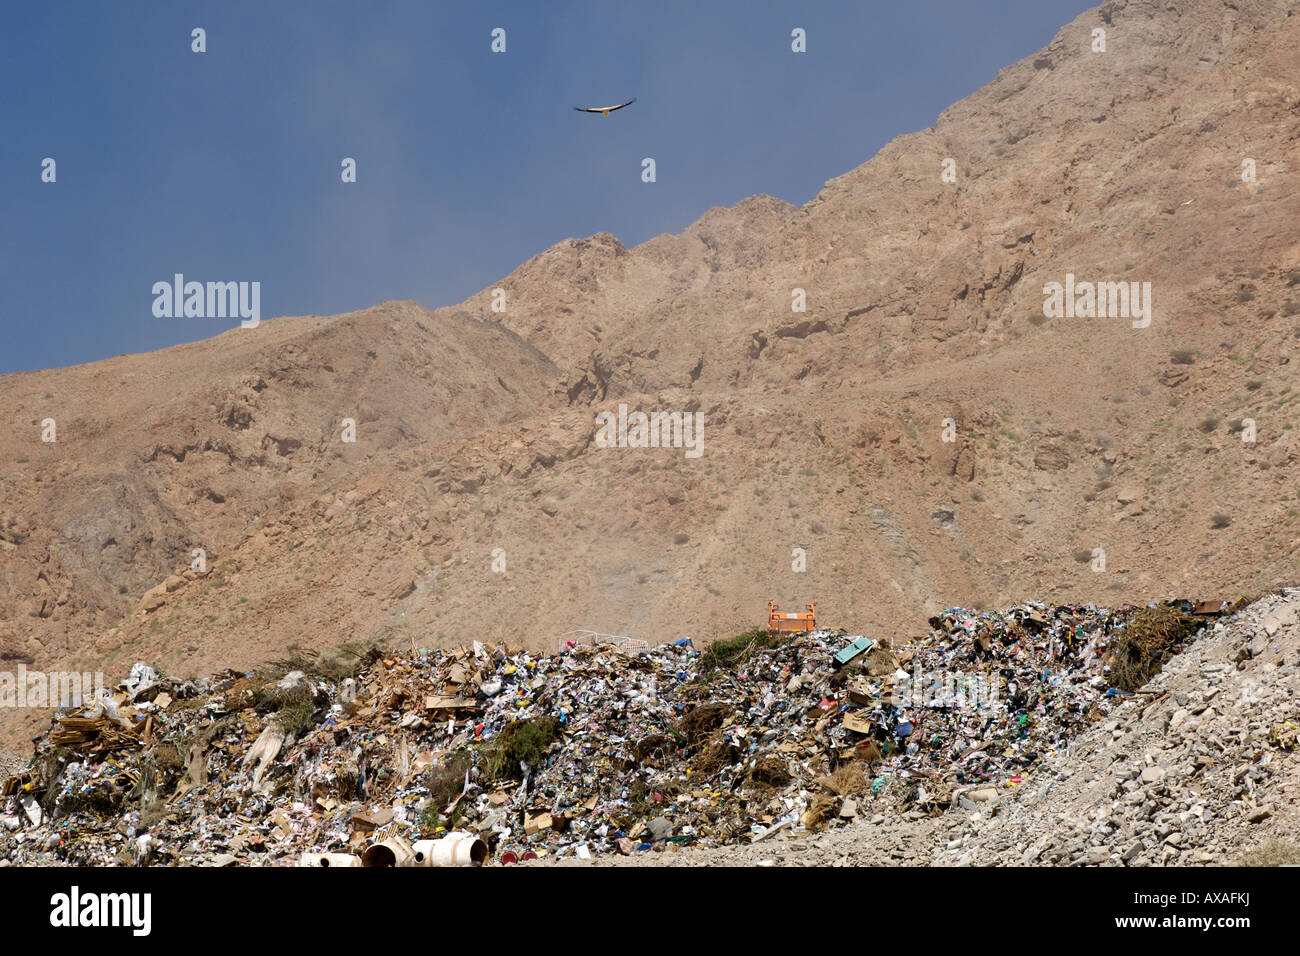 A vulture flying above a rubbish tip in the mountains near Muscat in Oman. Stock Photo